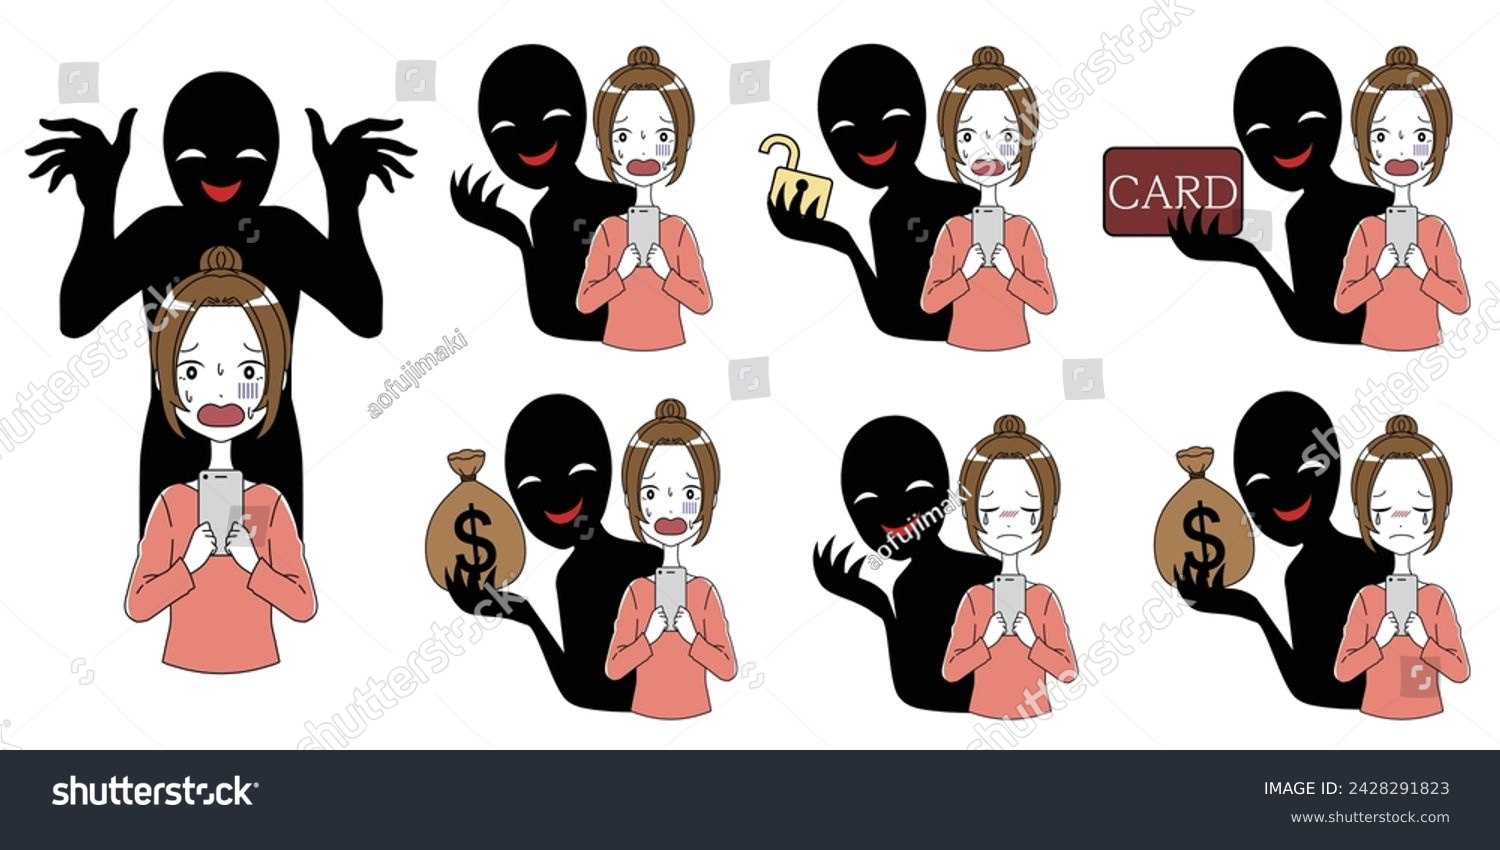 SVG of Material set of a woman with a smartphone targeted by a bad guy svg